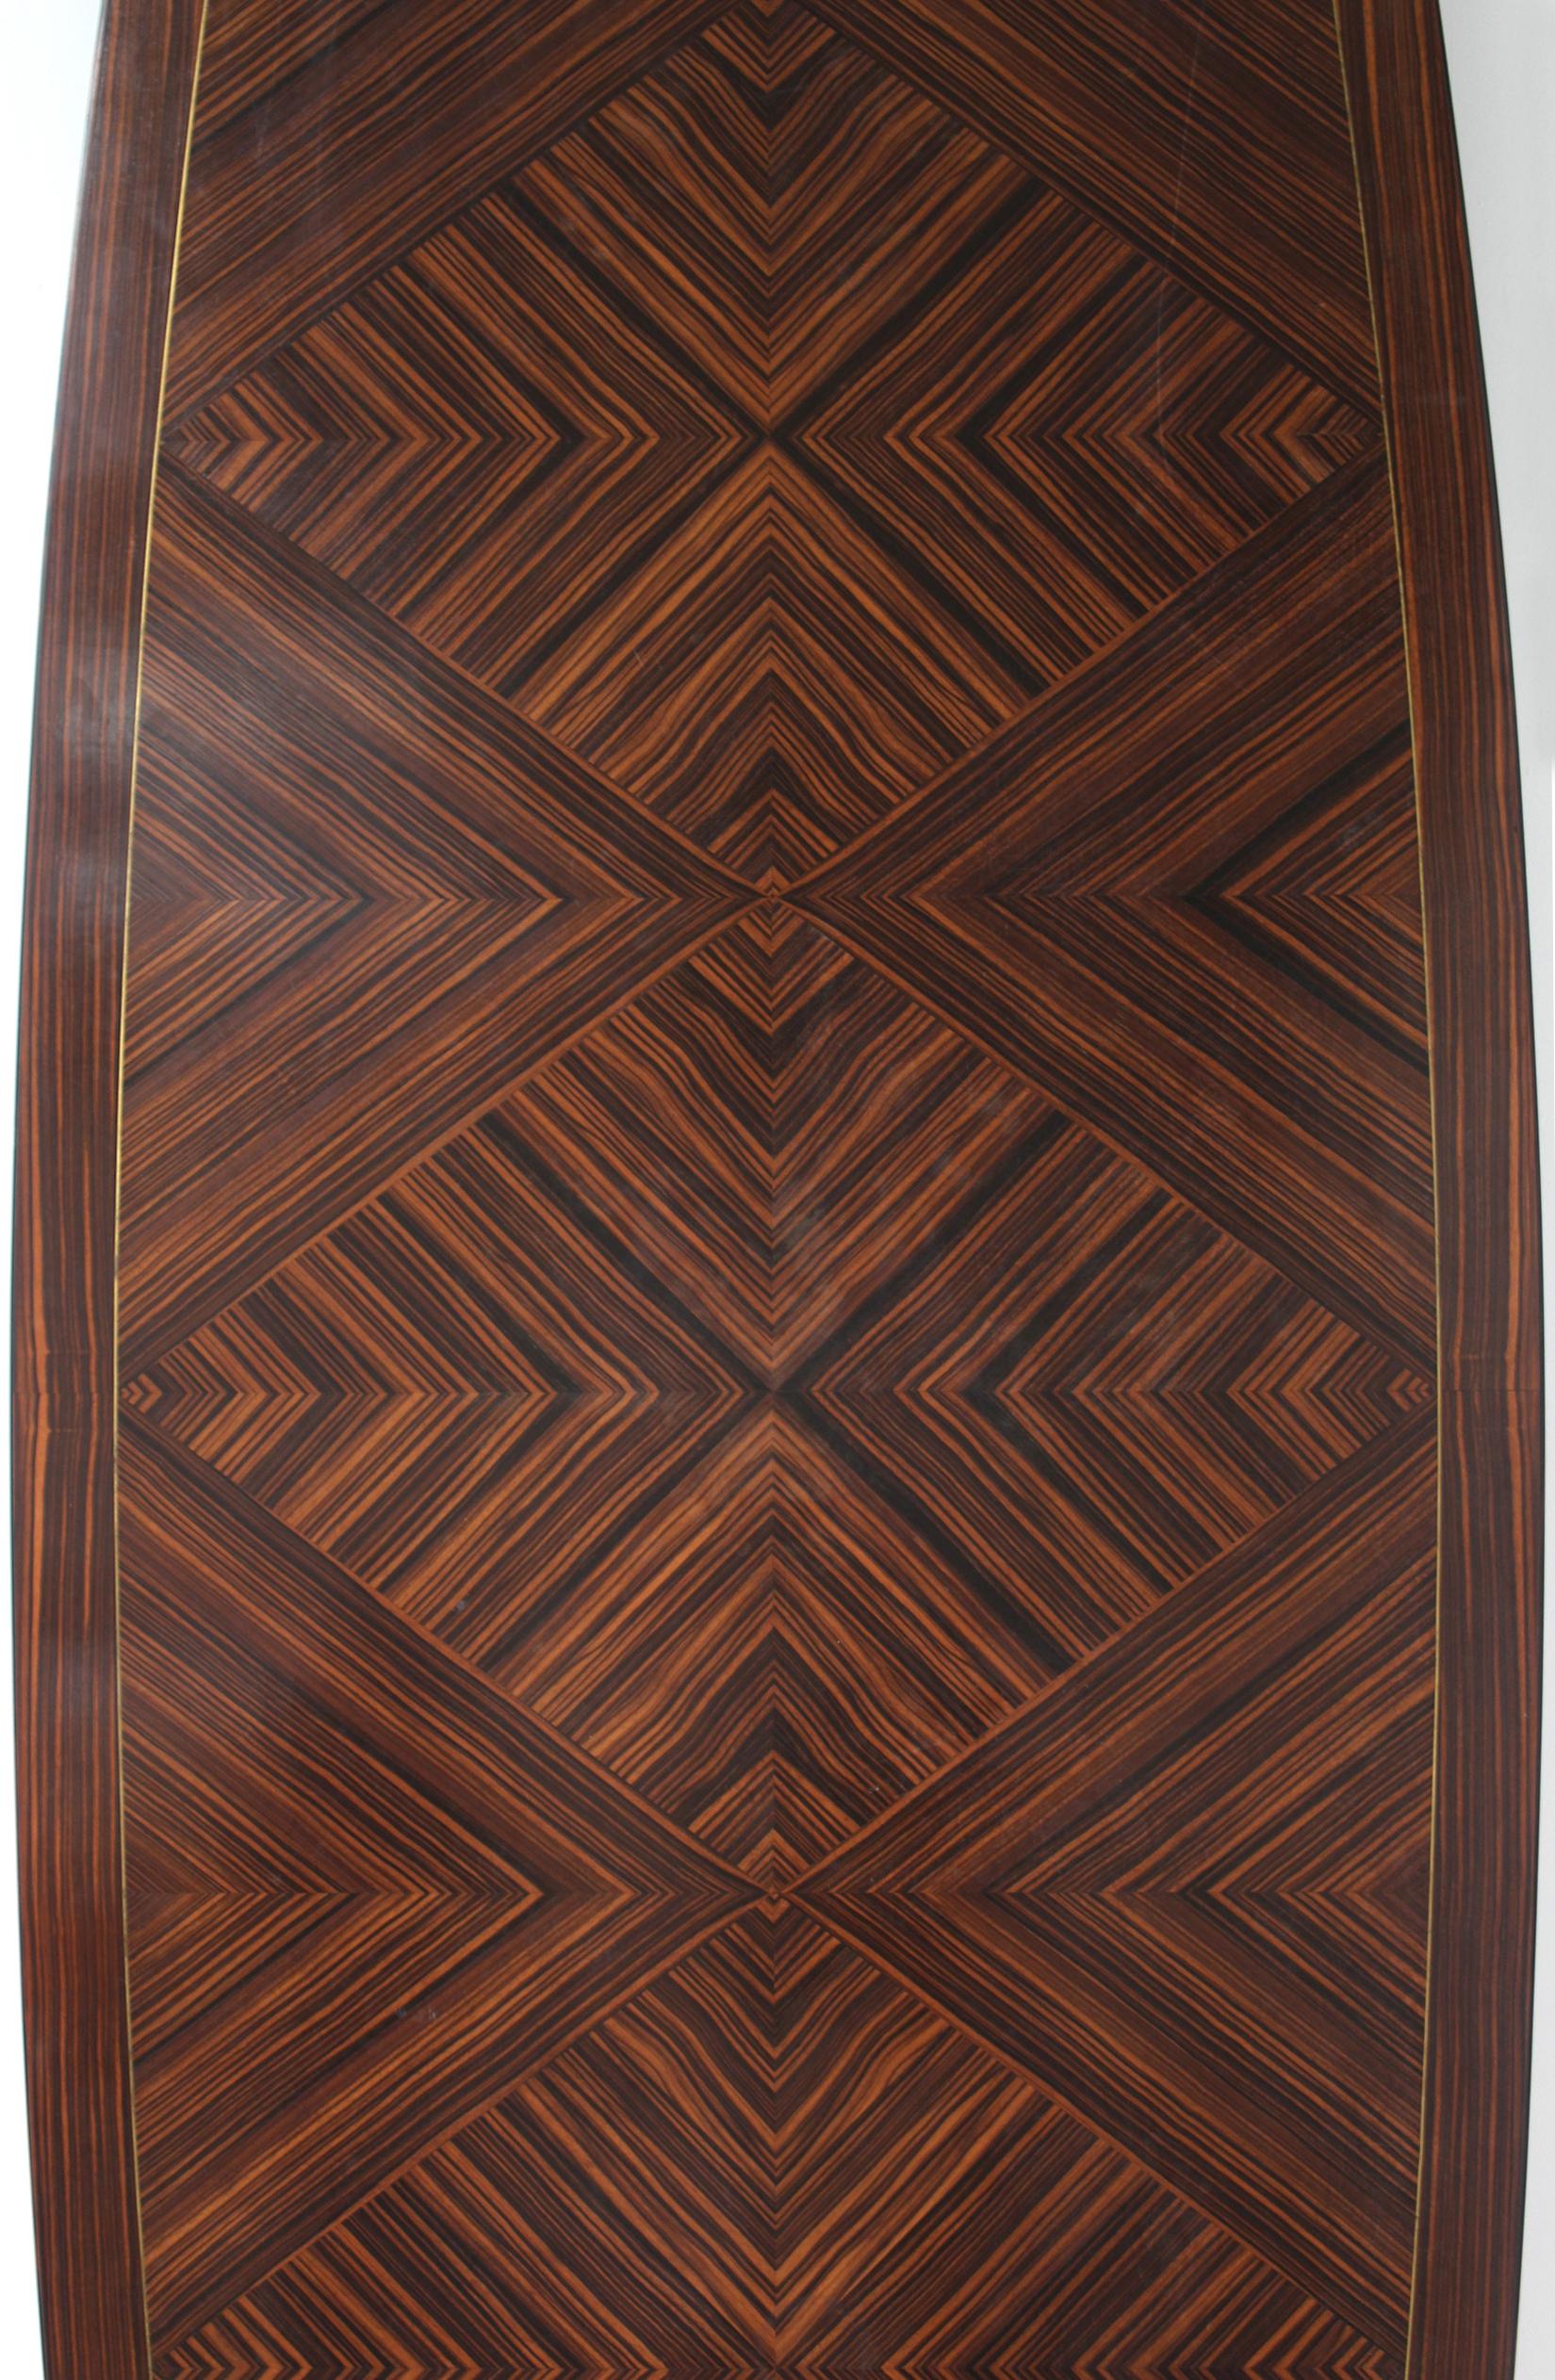 Mid-20th Century Large French Art Deco Macassar Ebony Table by Dominique